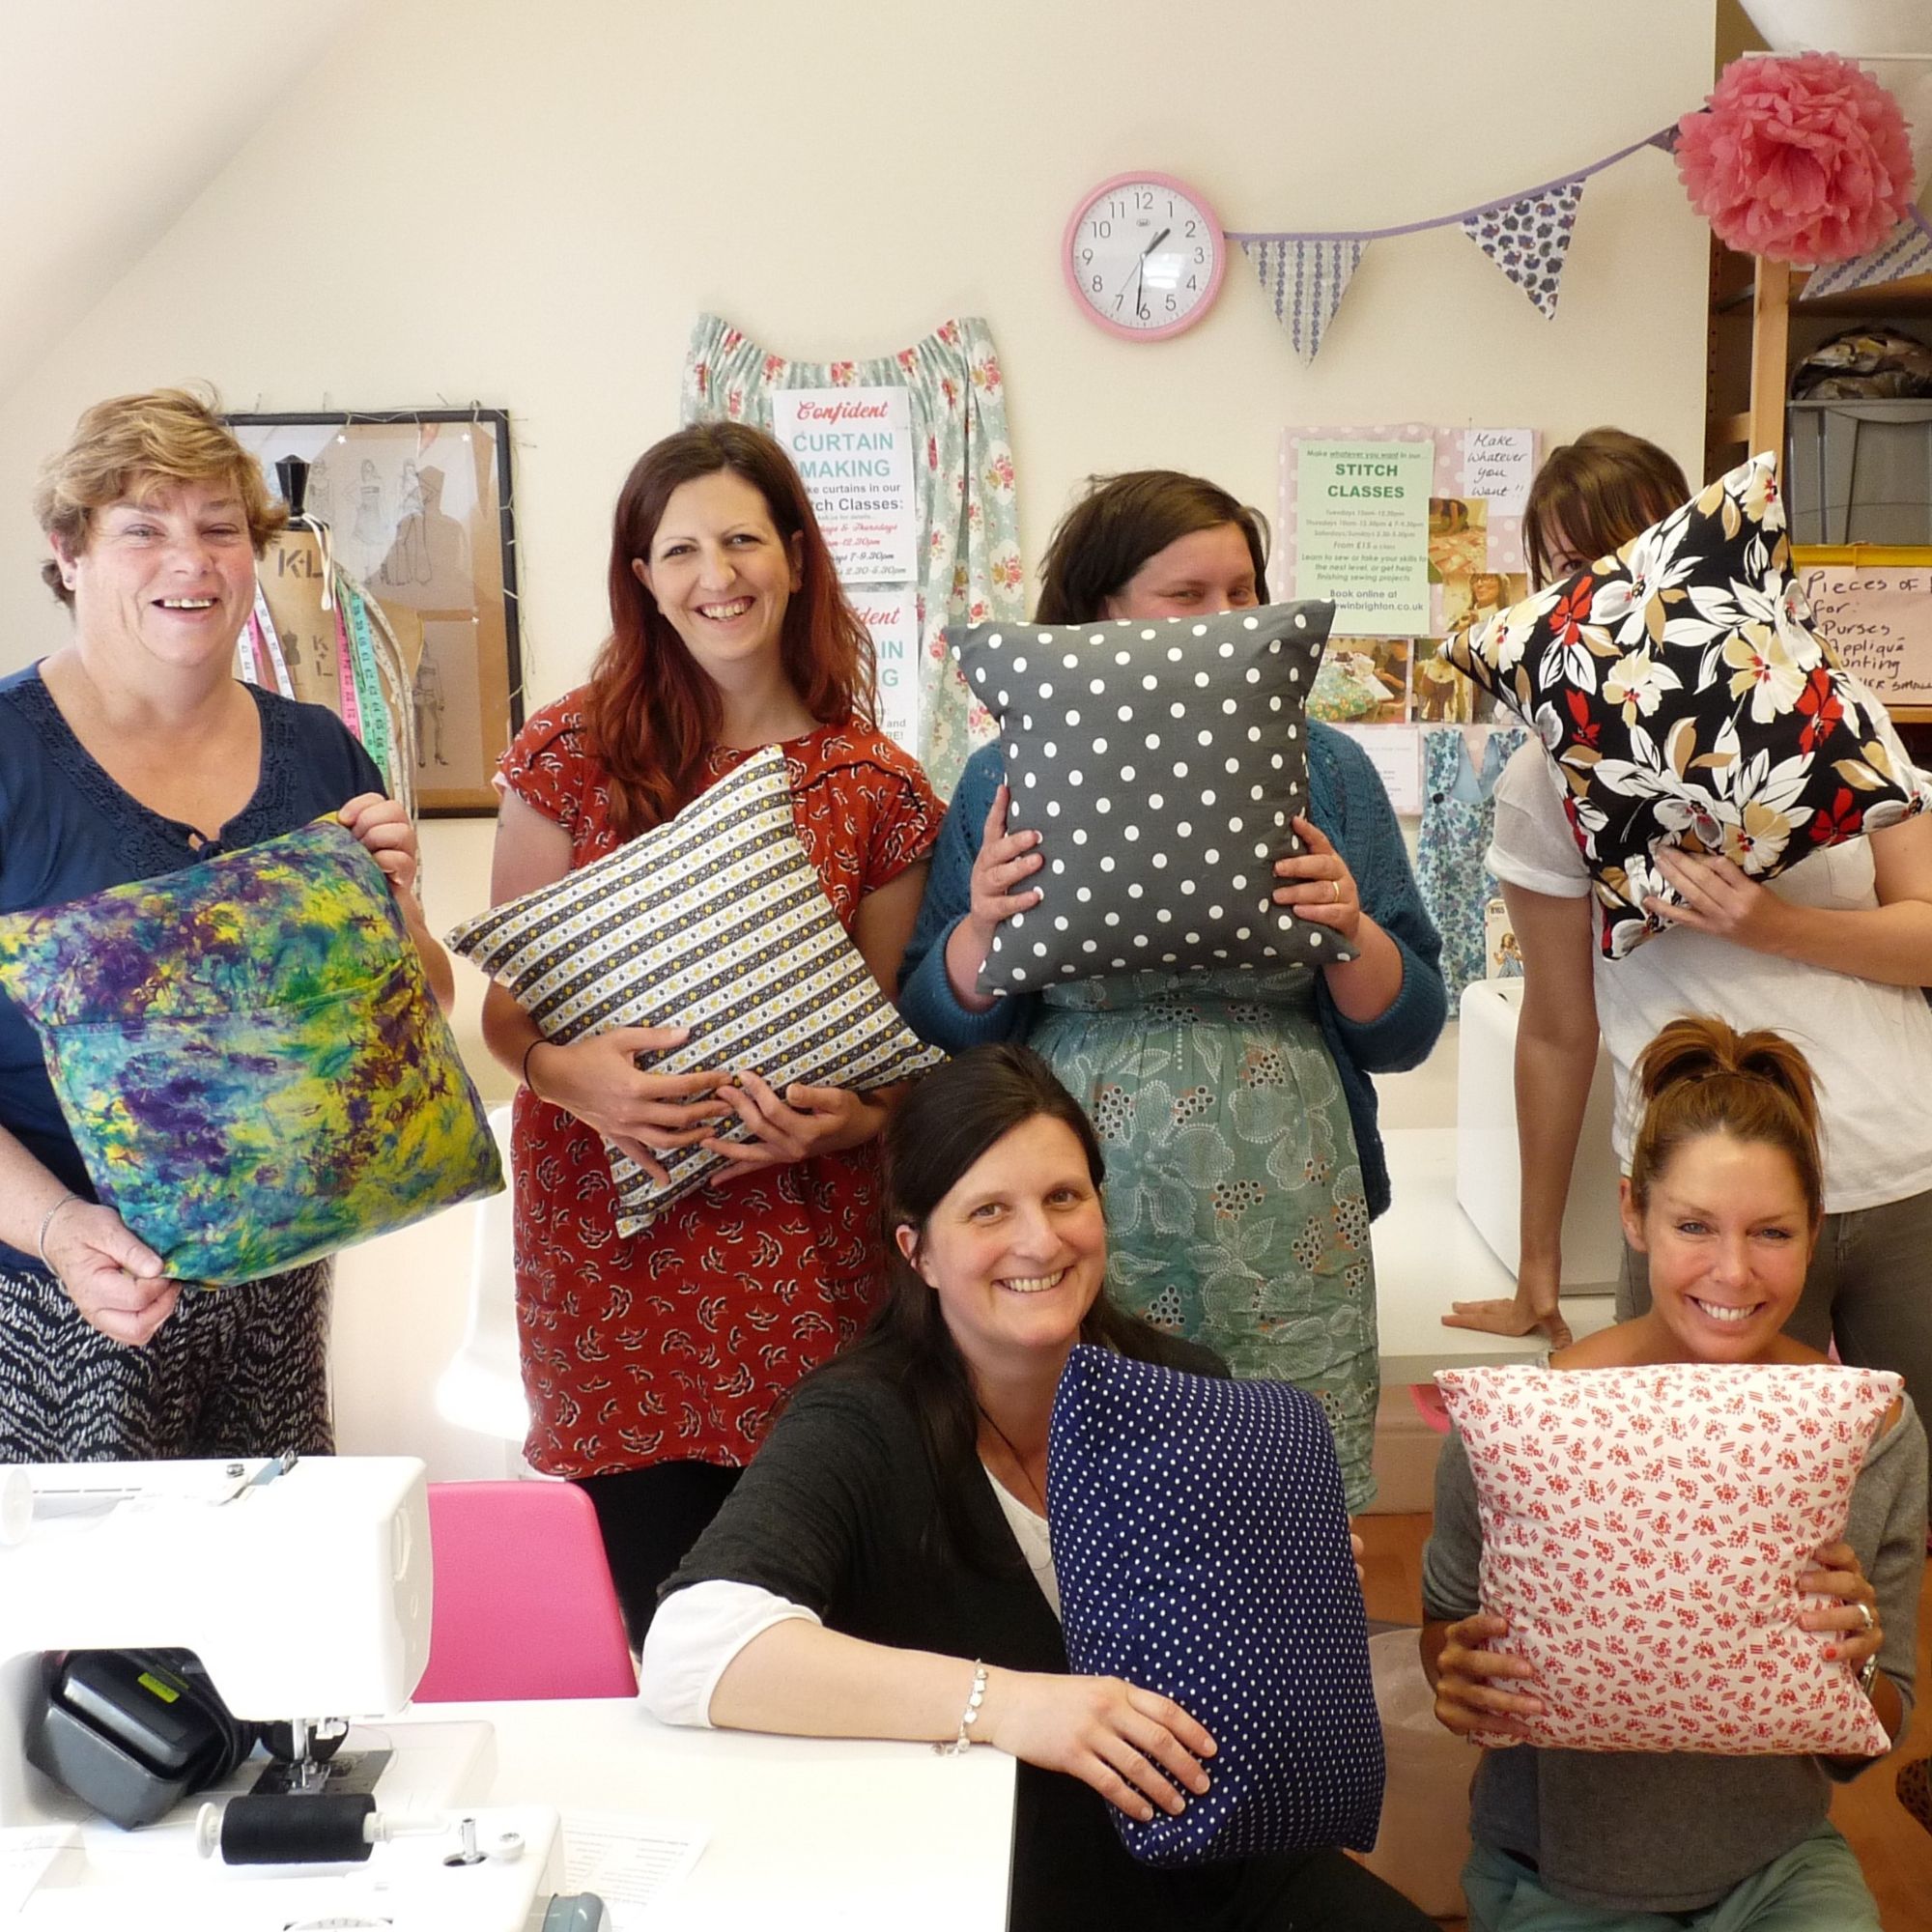 Cushion sewn in beginner class at Sew In Brighton sewing school